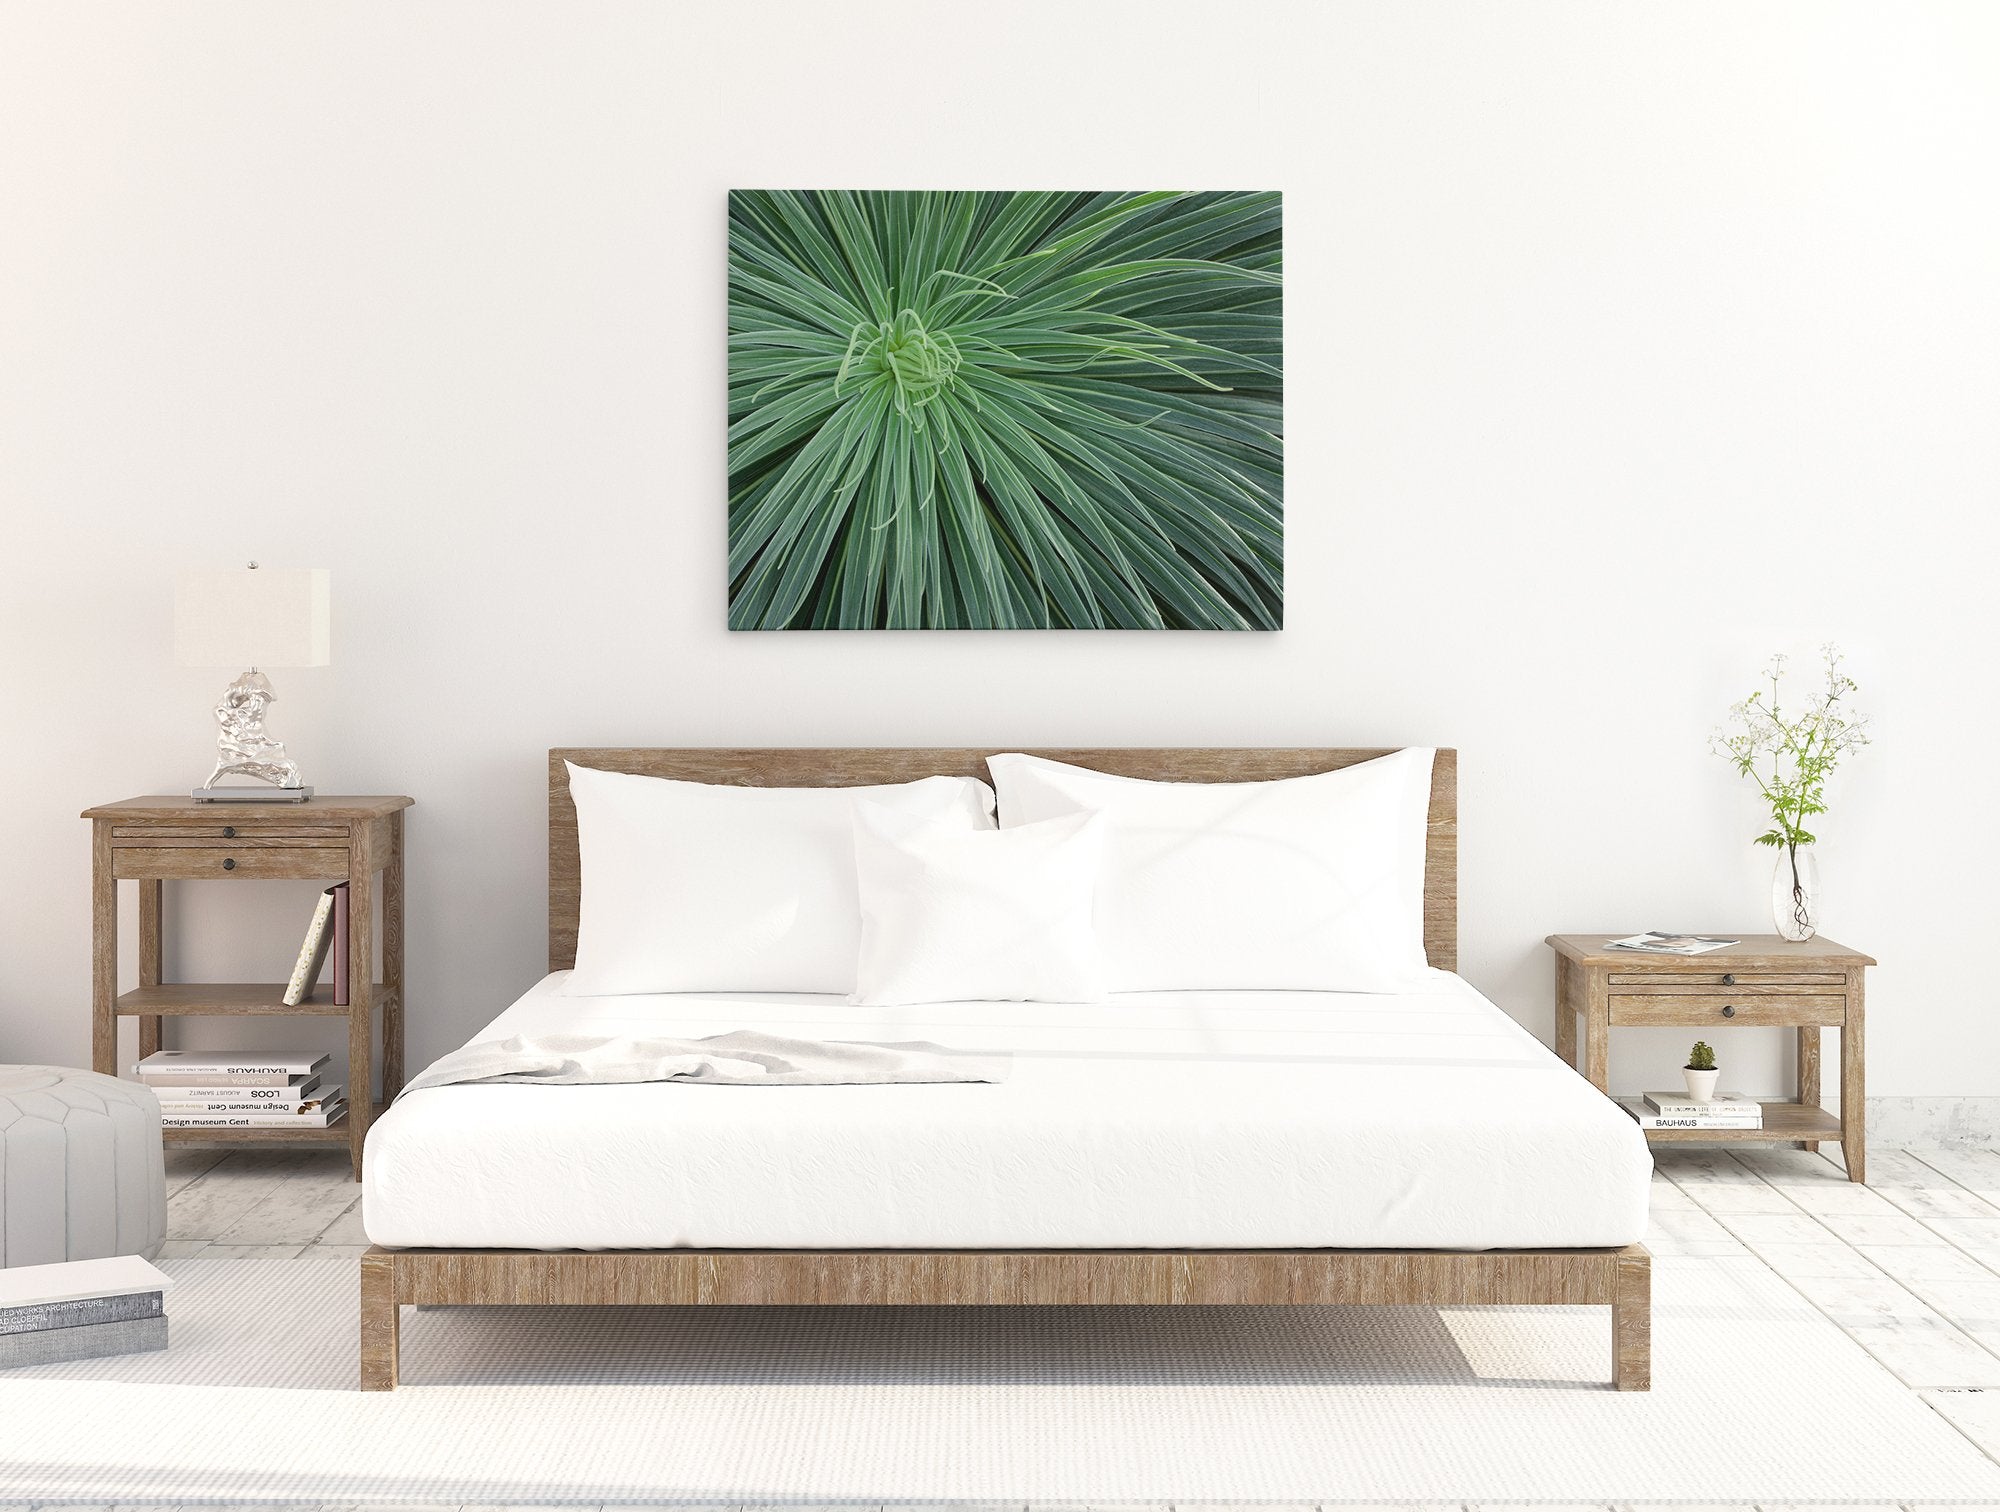 A minimalist bedroom featuring a neatly made bed with white linens, wooden side tables with lamps, and a large Offley Green Abstract Green Botanical Canvas Wall Art, &#39;Desert Fireworks&#39; above the bed.